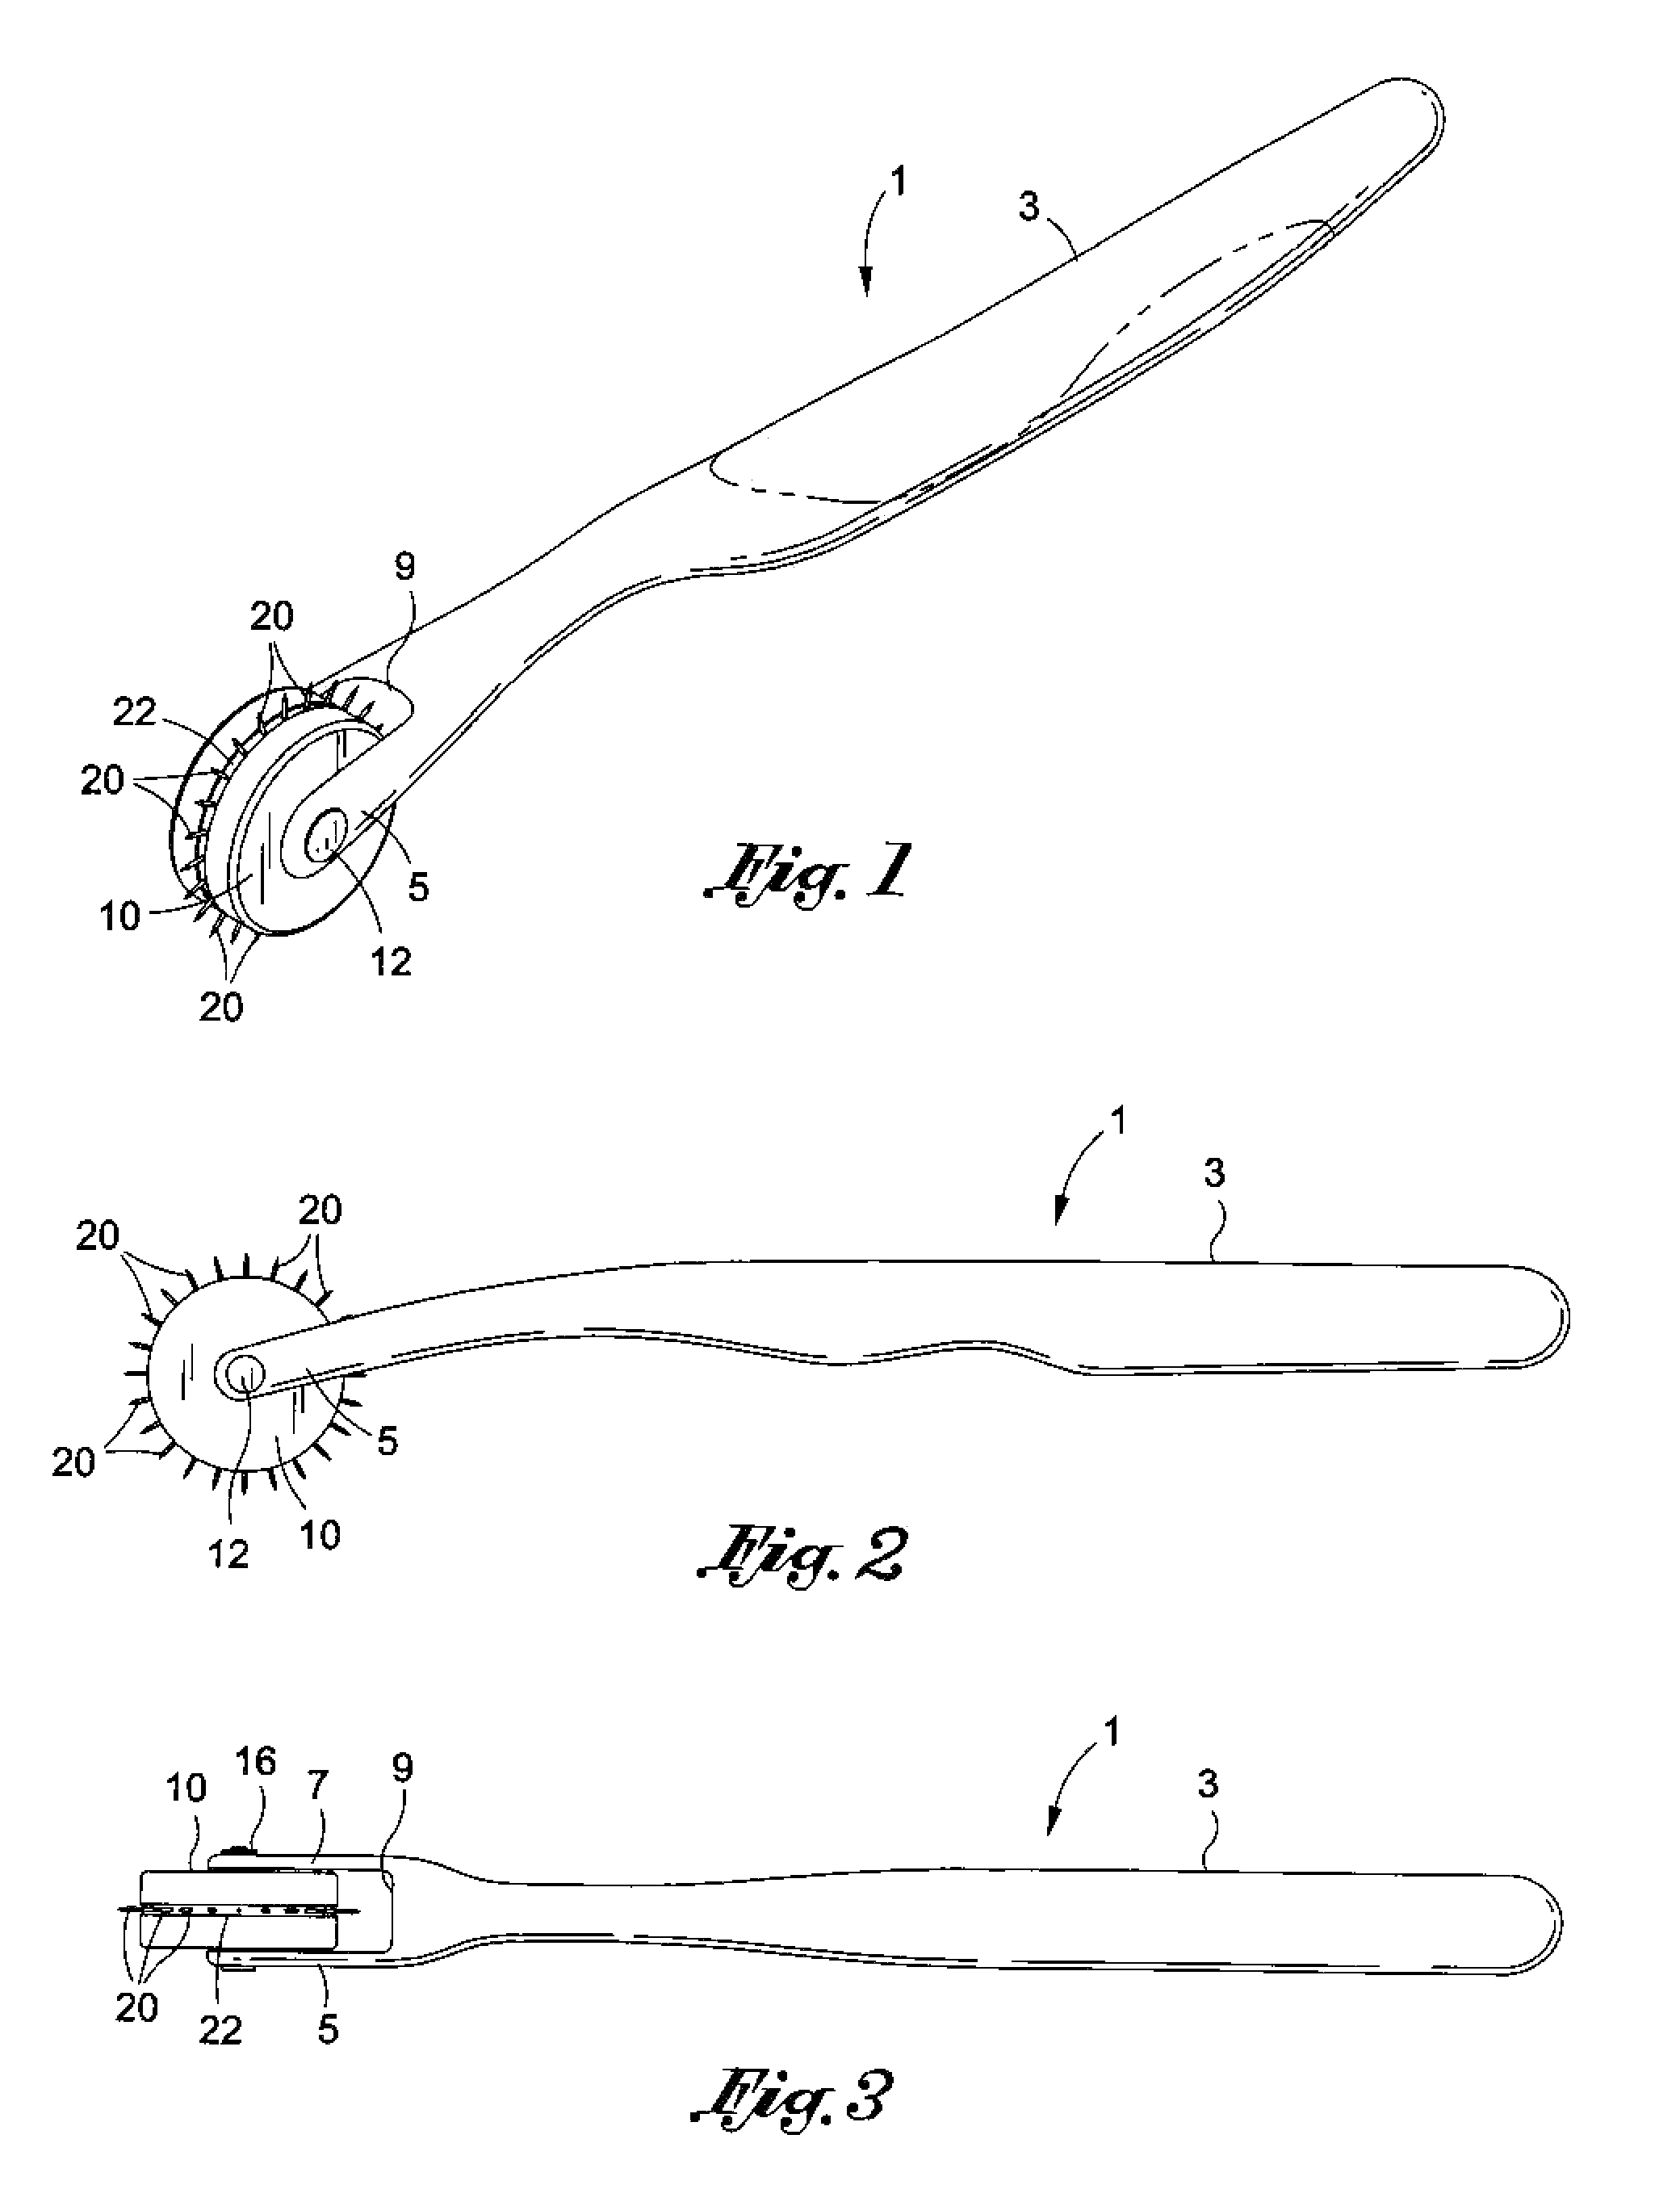 Hand-held apparatus and method for reducing wrinkles in human skin